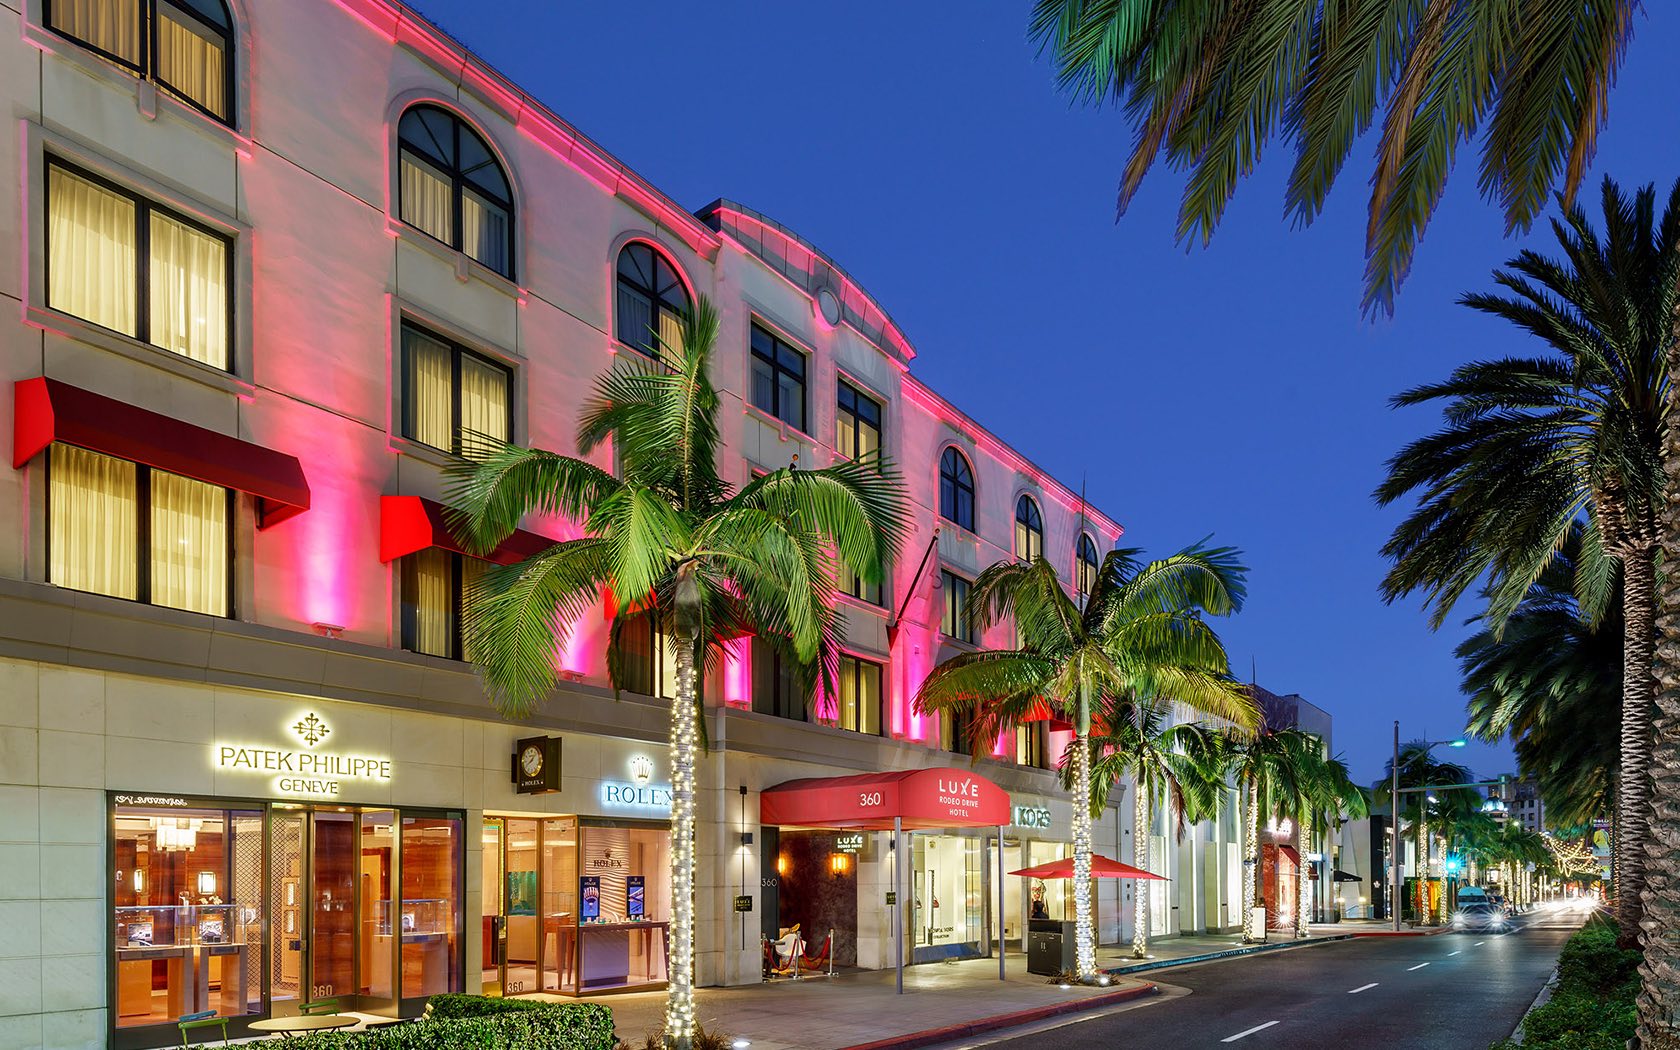 Luxe Rodeo Drive Hotel is a gay and lesbian friendly hotel in Beverly Hills.